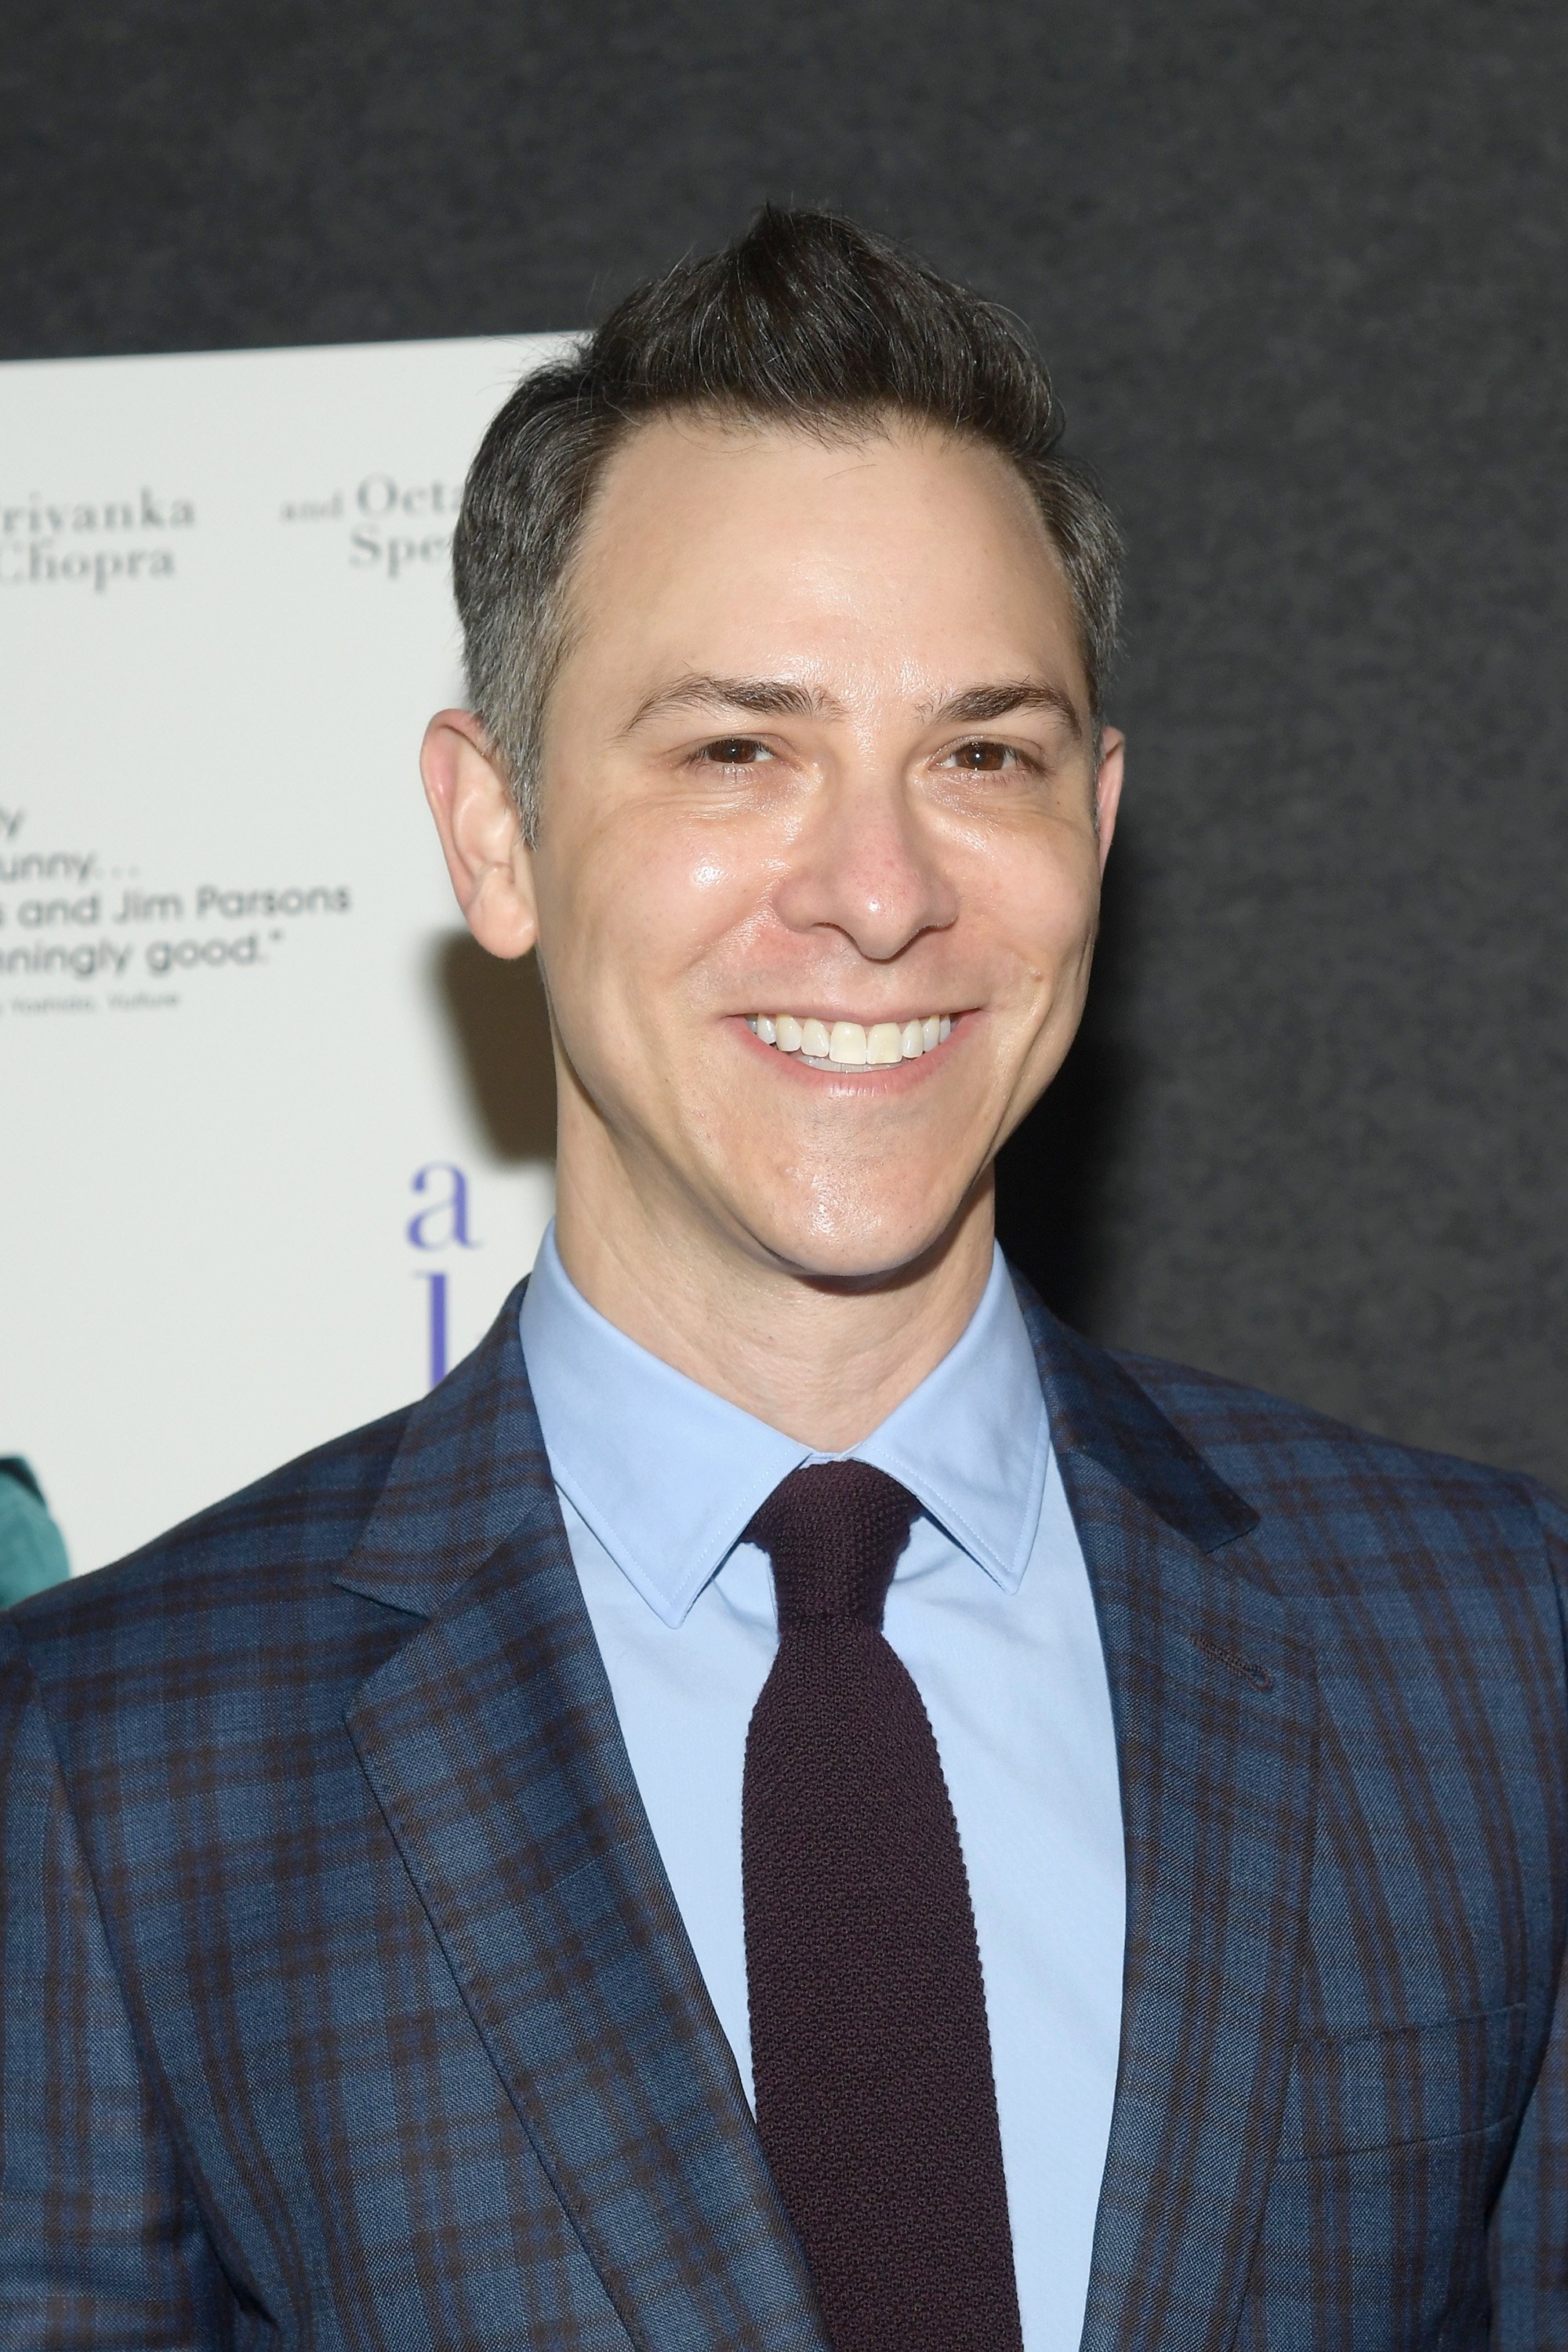 Todd Spiewak at the premiere of "A Kid Like Jake" on May 21, 2018 | Source: Getty Images